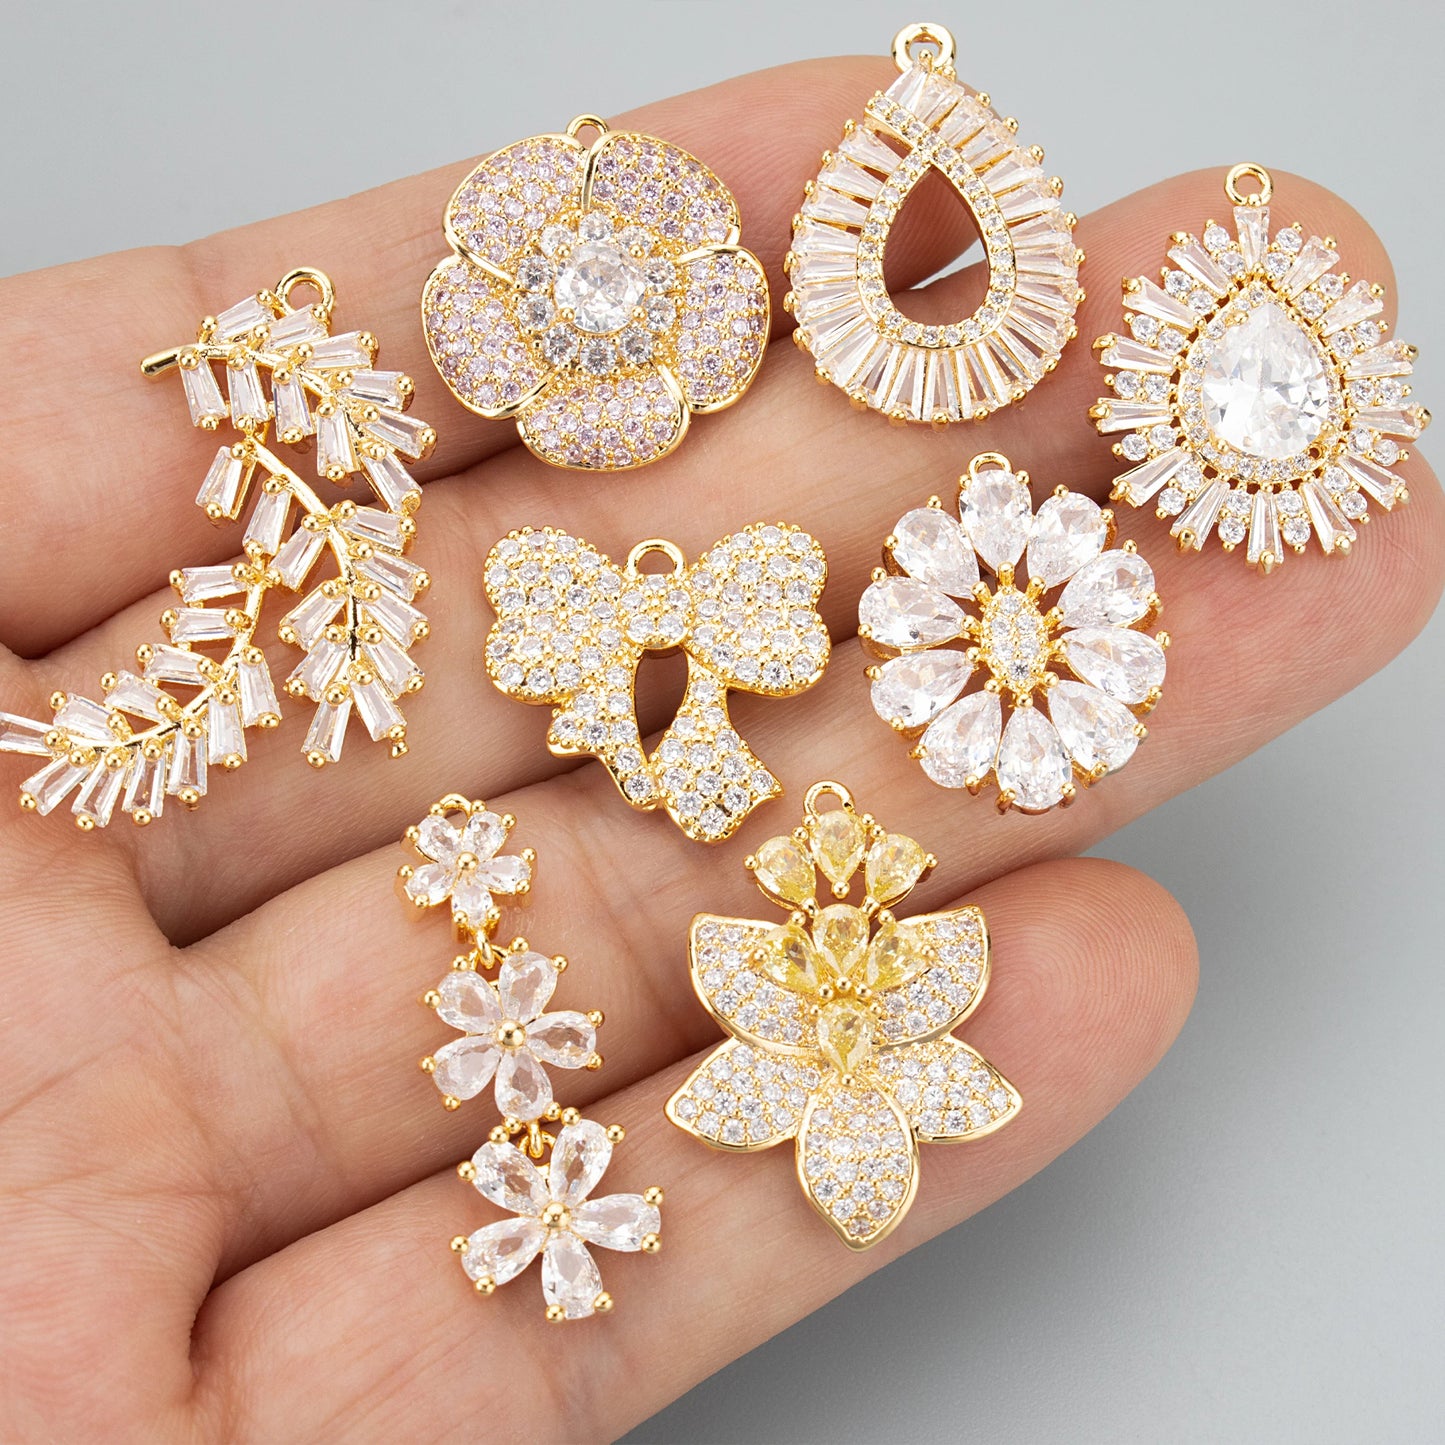 GUFEATHER ME18,jewelry accessories,18k gold rhodium plated,copper,zircons,hand made,charms,jewelry making,diy pendants,4pcs/lot